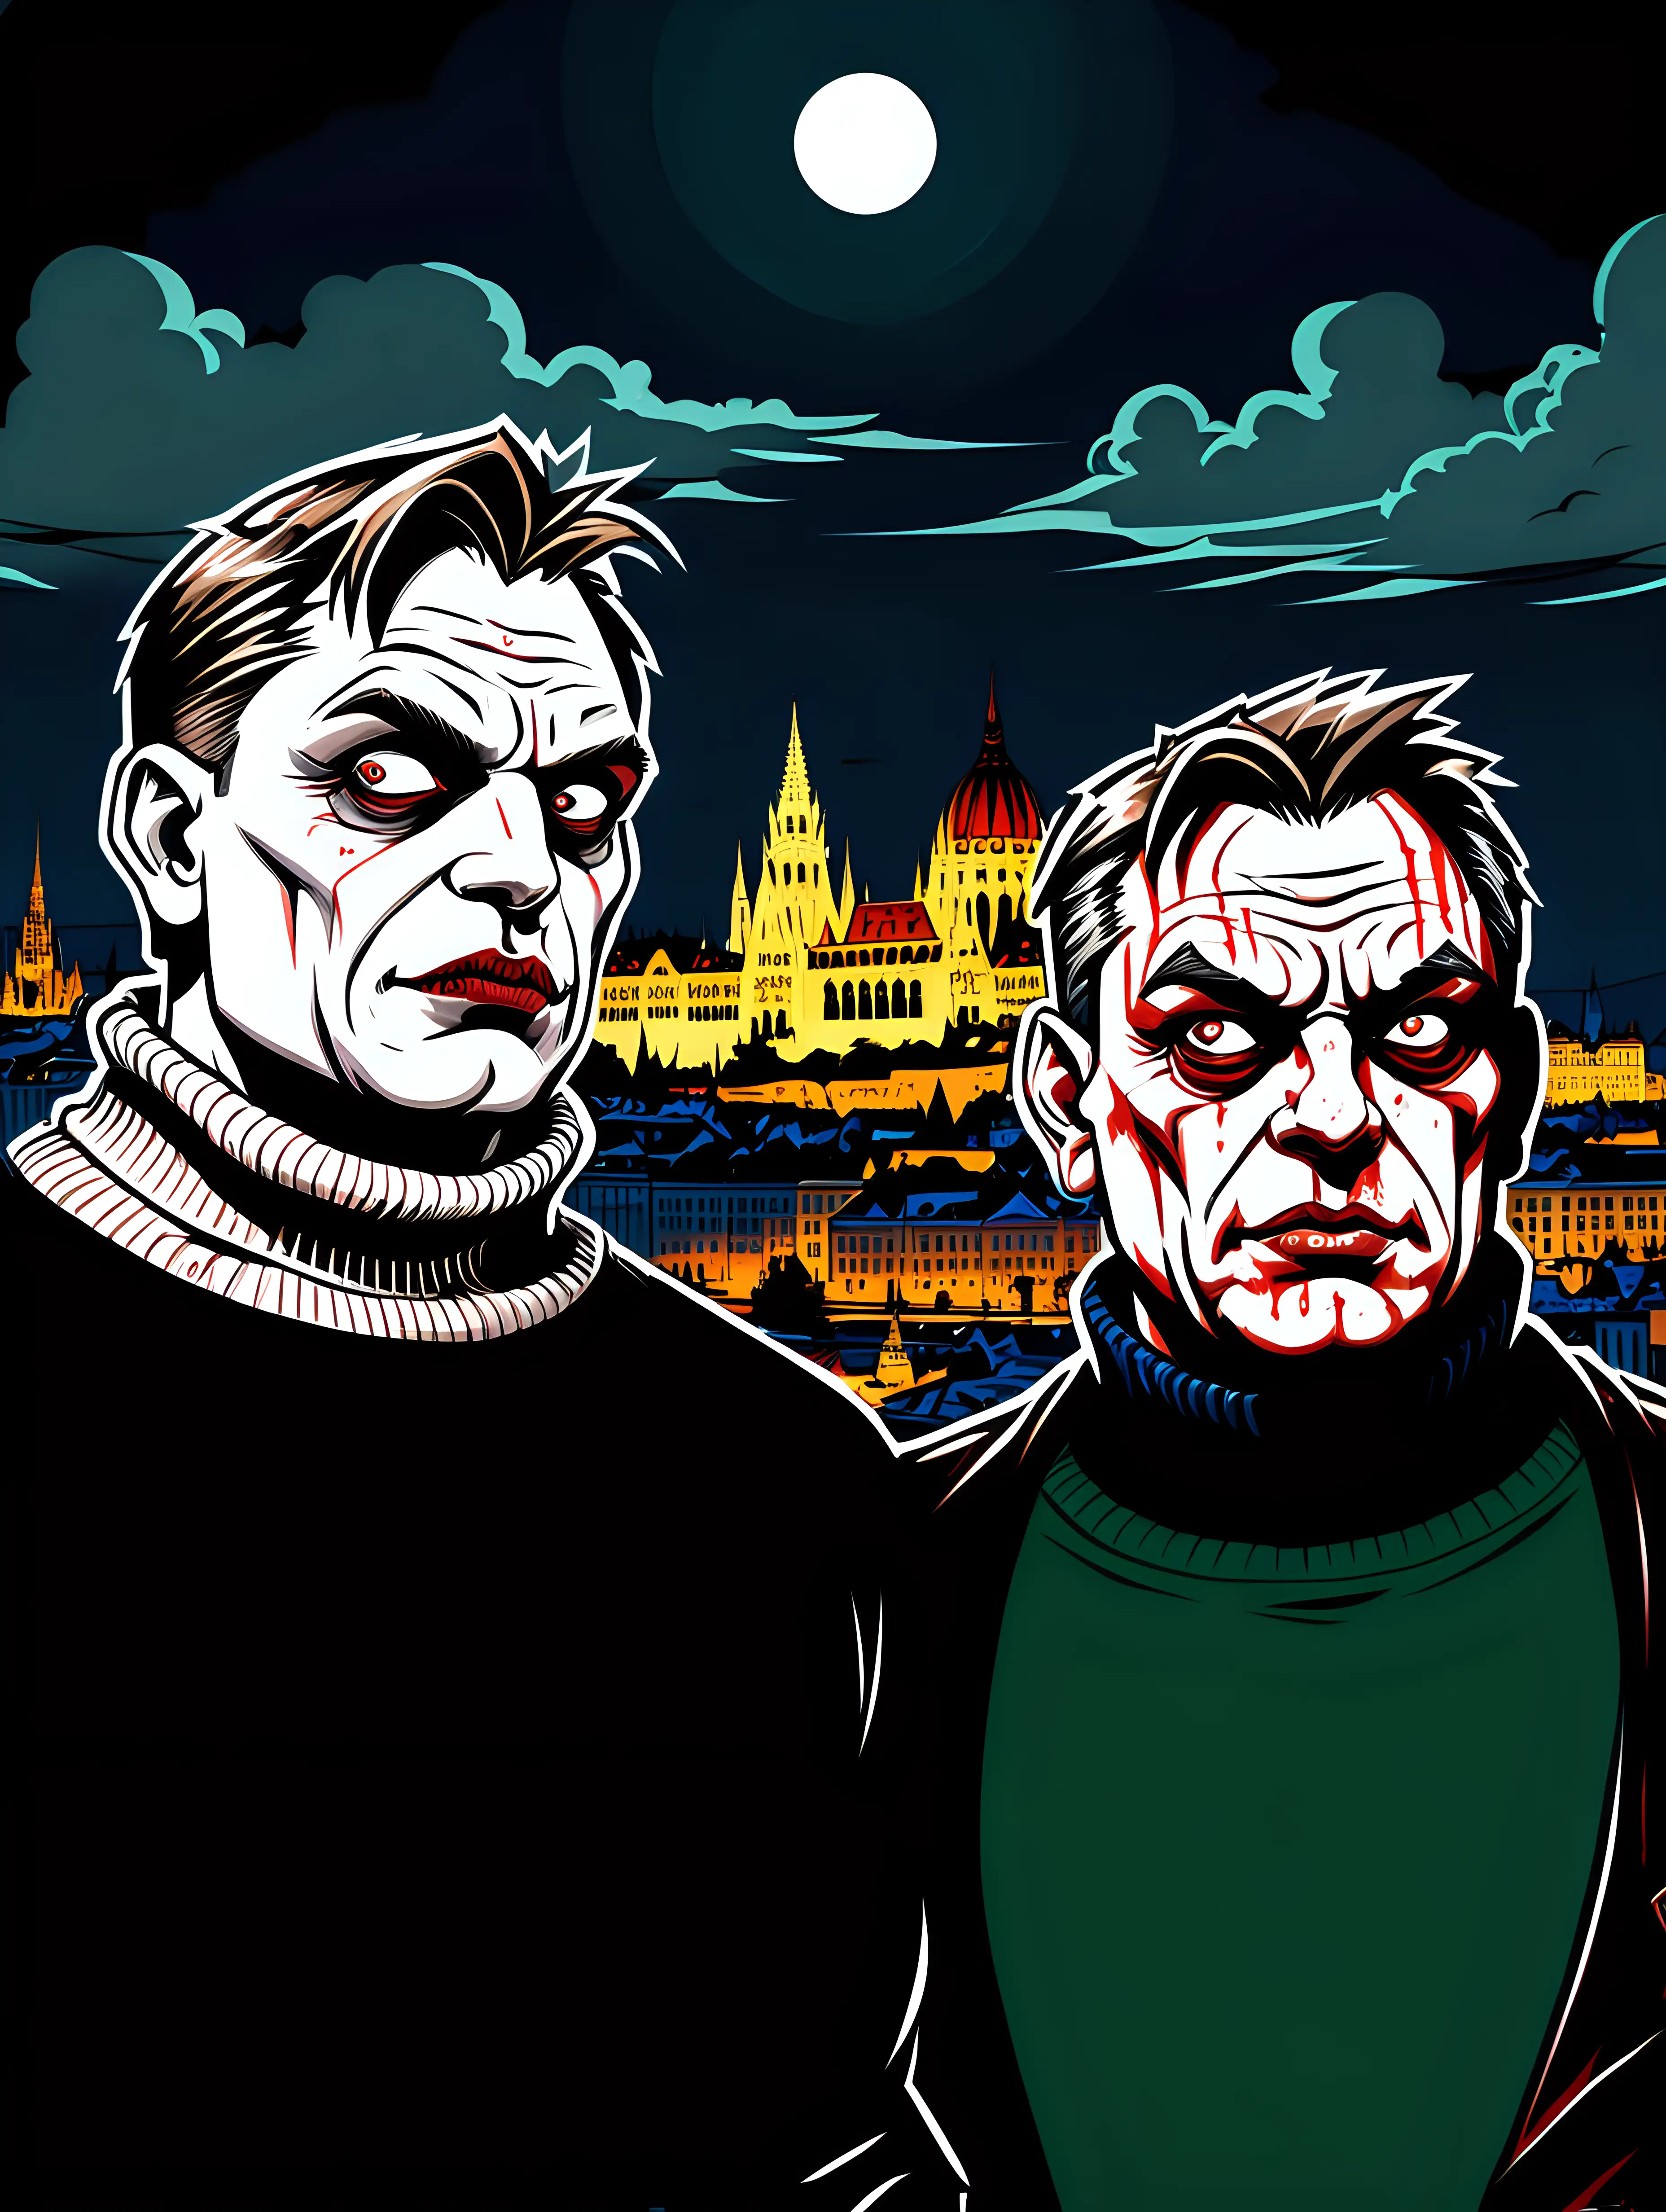 two bloody vampires Robert Fico with Viktor Orban hideous vampires in a turtleneck sweater. city of Budapest at night background. line drawn in the style of Mike Mignola depicting Robert Fico and Viktor Orban as two serious villain vampires 